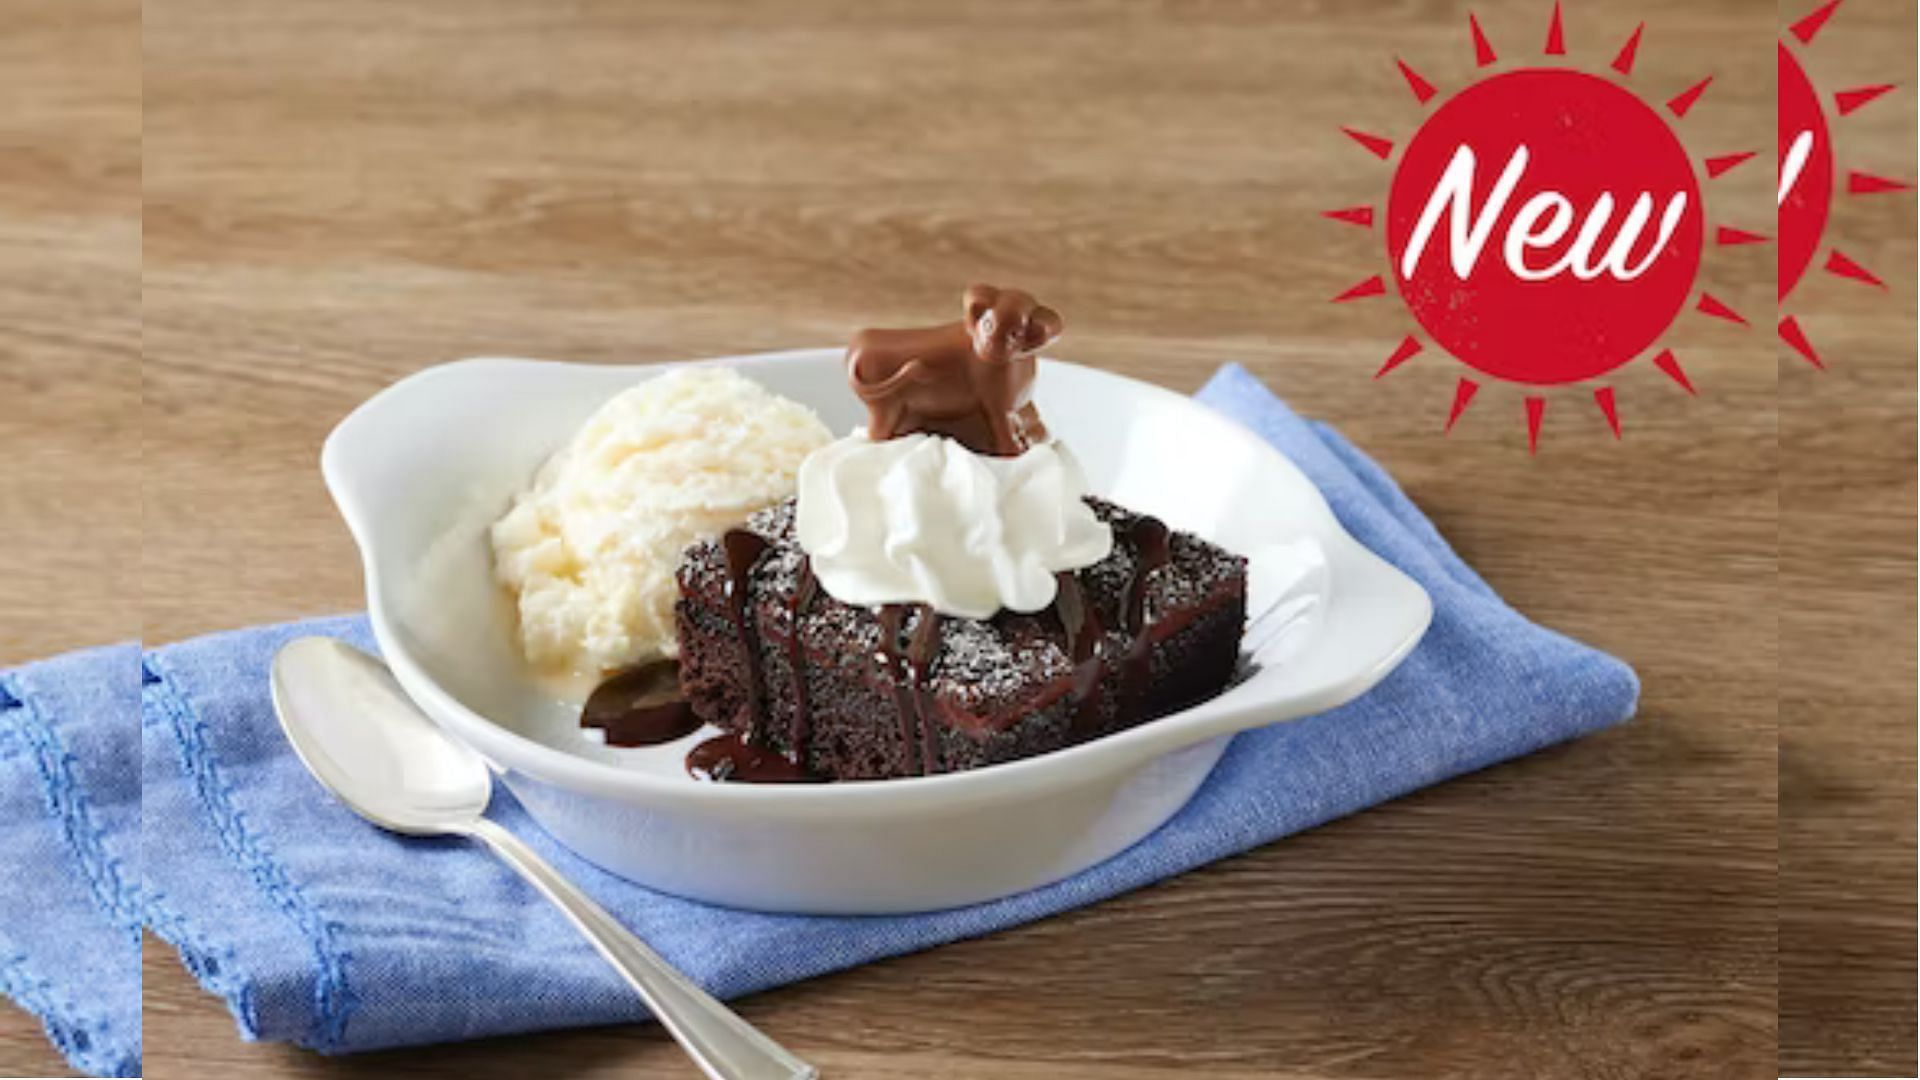 promotional image for the limited-time Bob Evans&rsquo; Holy Cow Chocolate Cake (Image via Bob Evans)